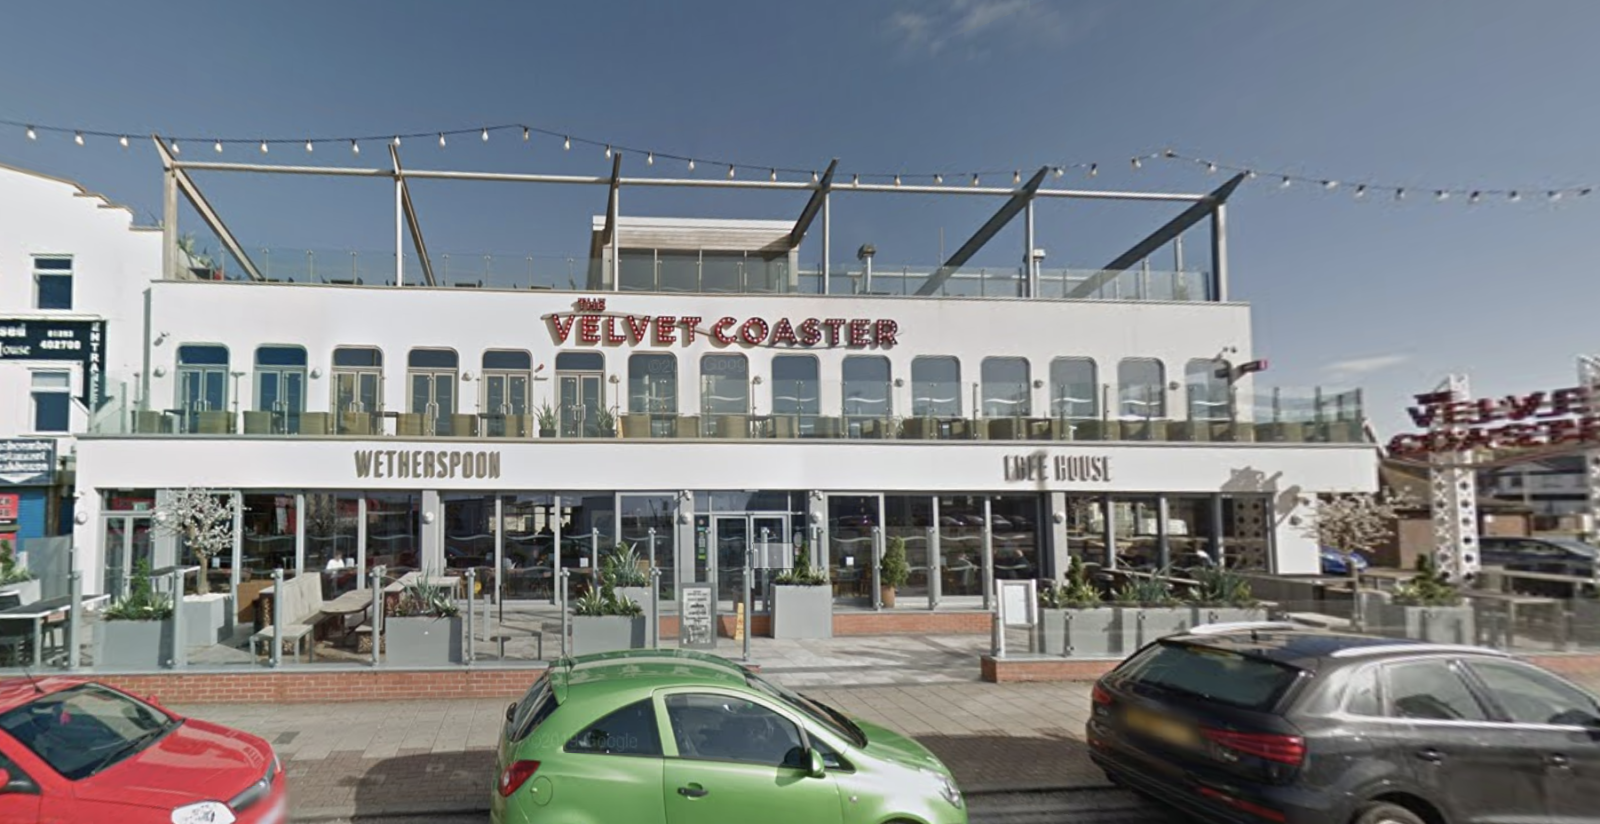 The Velvet Coaster in Blackpool is part of the Wetherspoons holiday package. Credit: Google Maps